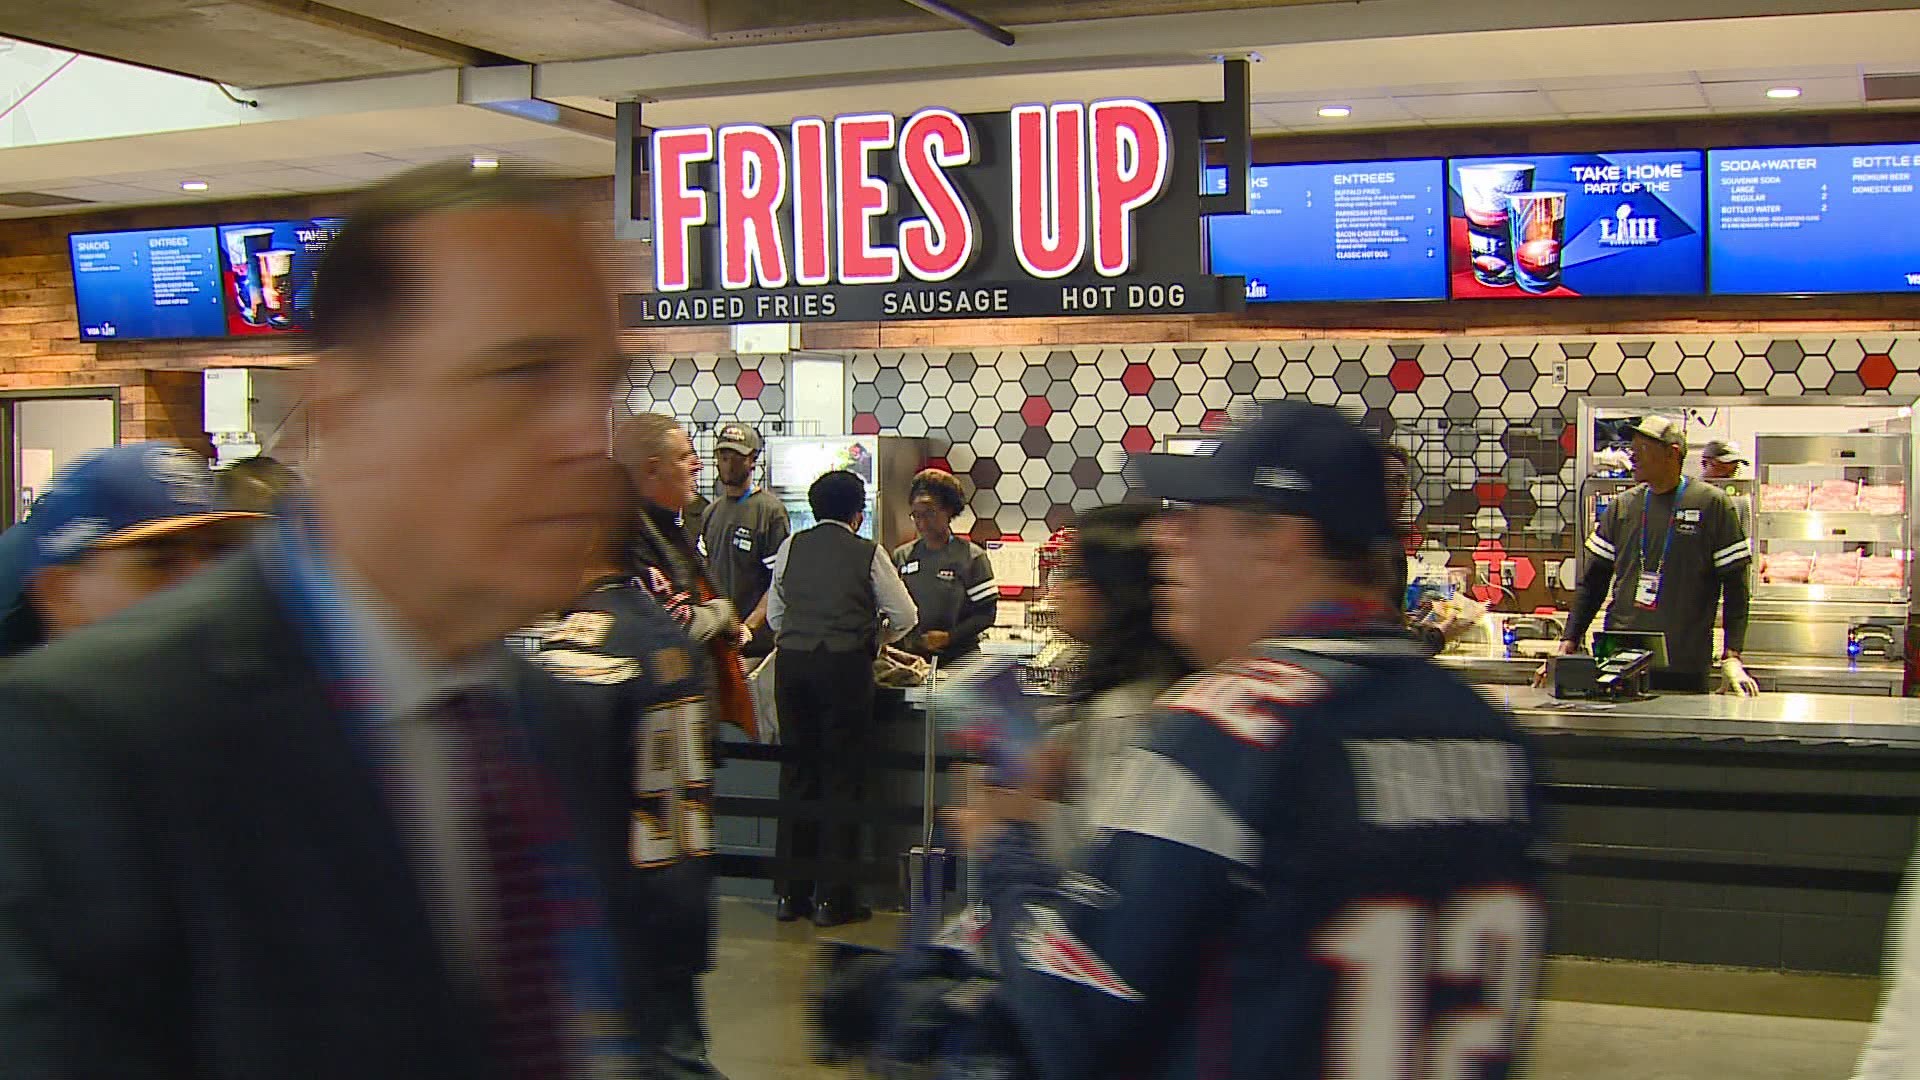 Say hello to Fries Up, the stadium's alter-ego entity for special Sunday occasions.